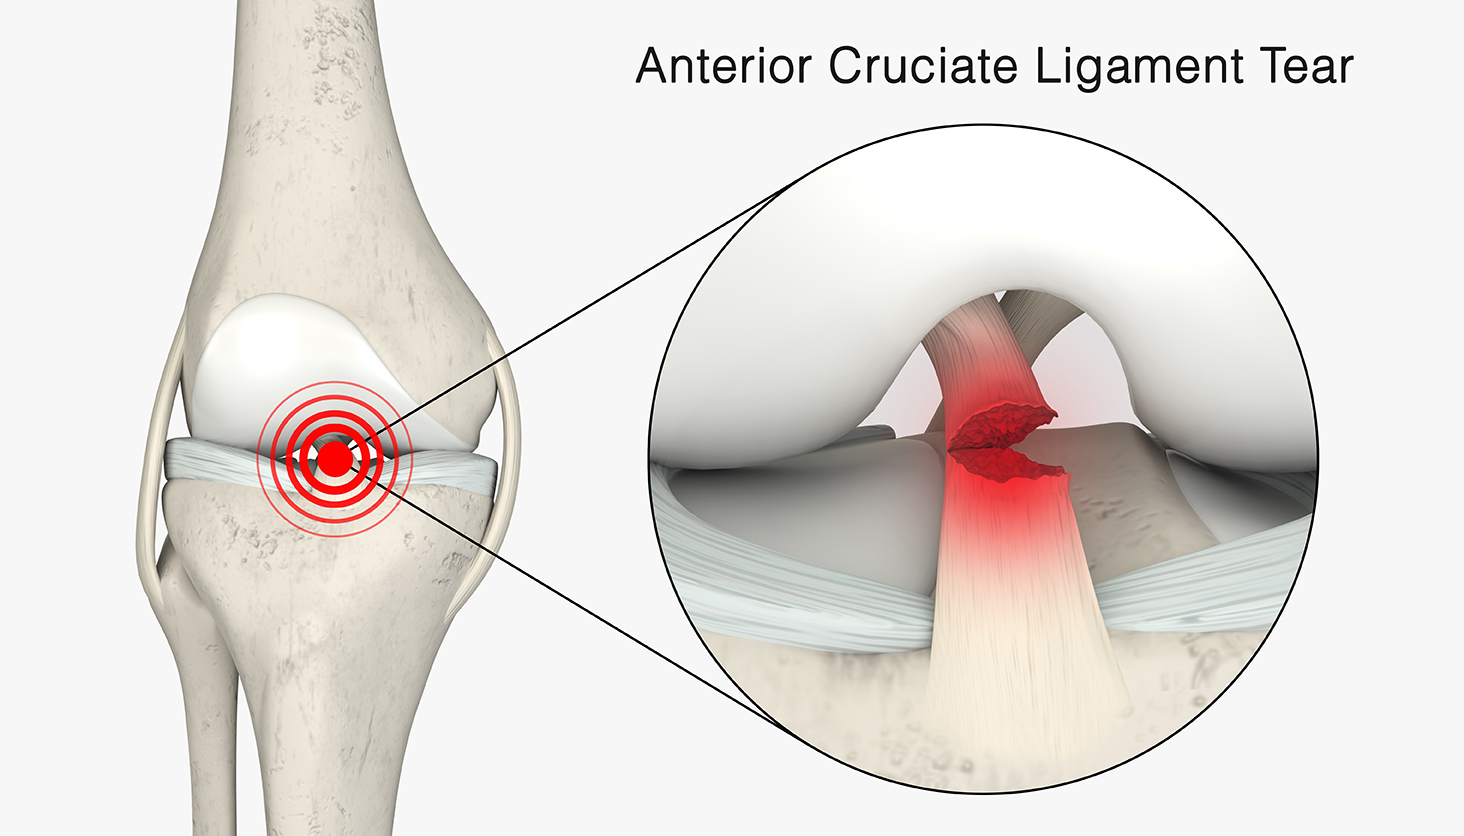 Five Ways to Prevent Anterior Cruciate Ligament Injuries